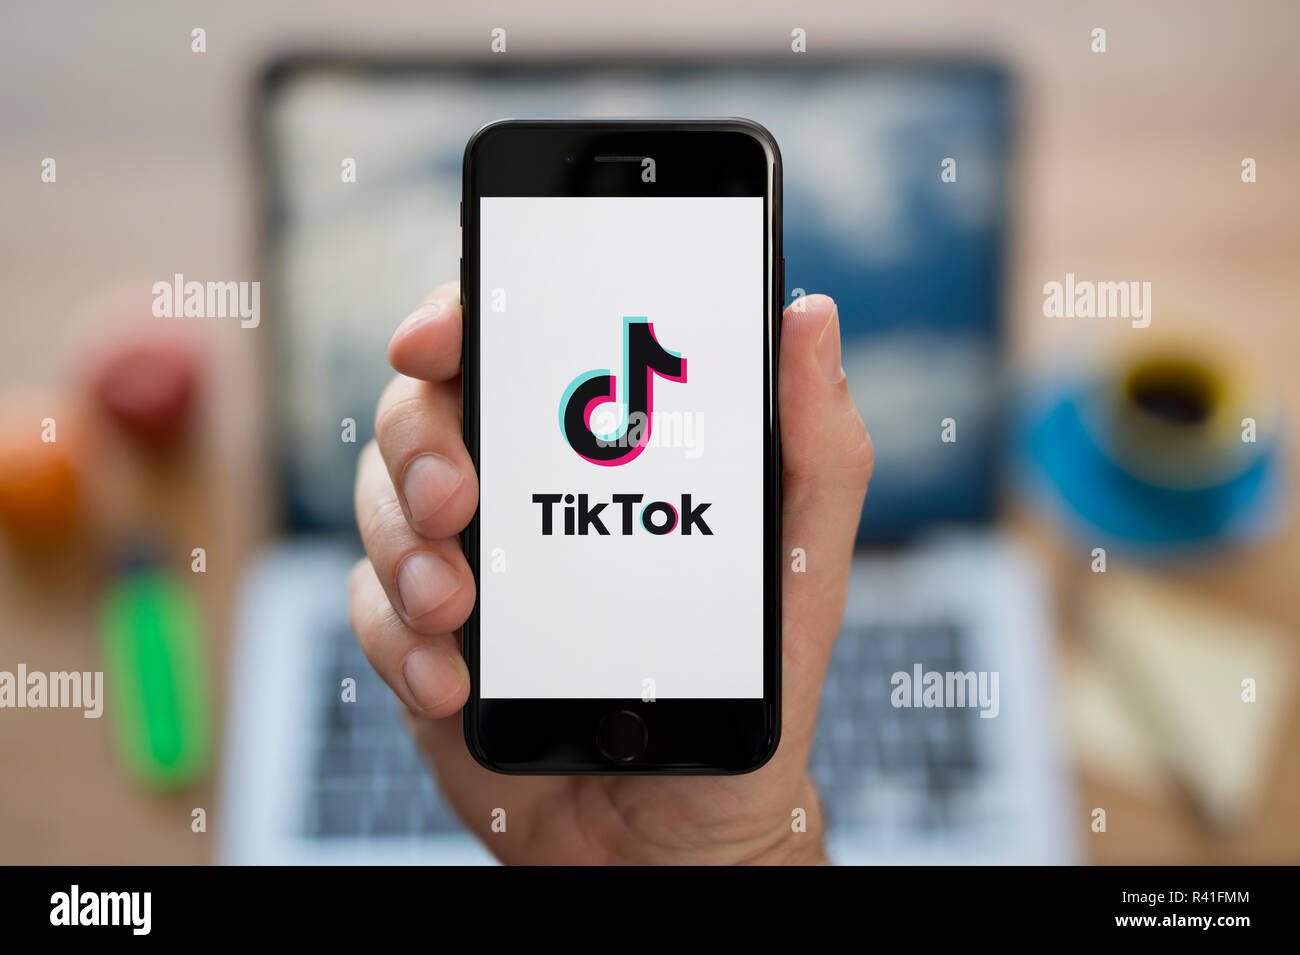 A man looks at his iPhone which displays the TikTok logo, while sat at his computer desk (Editorial use only). Stock Photo